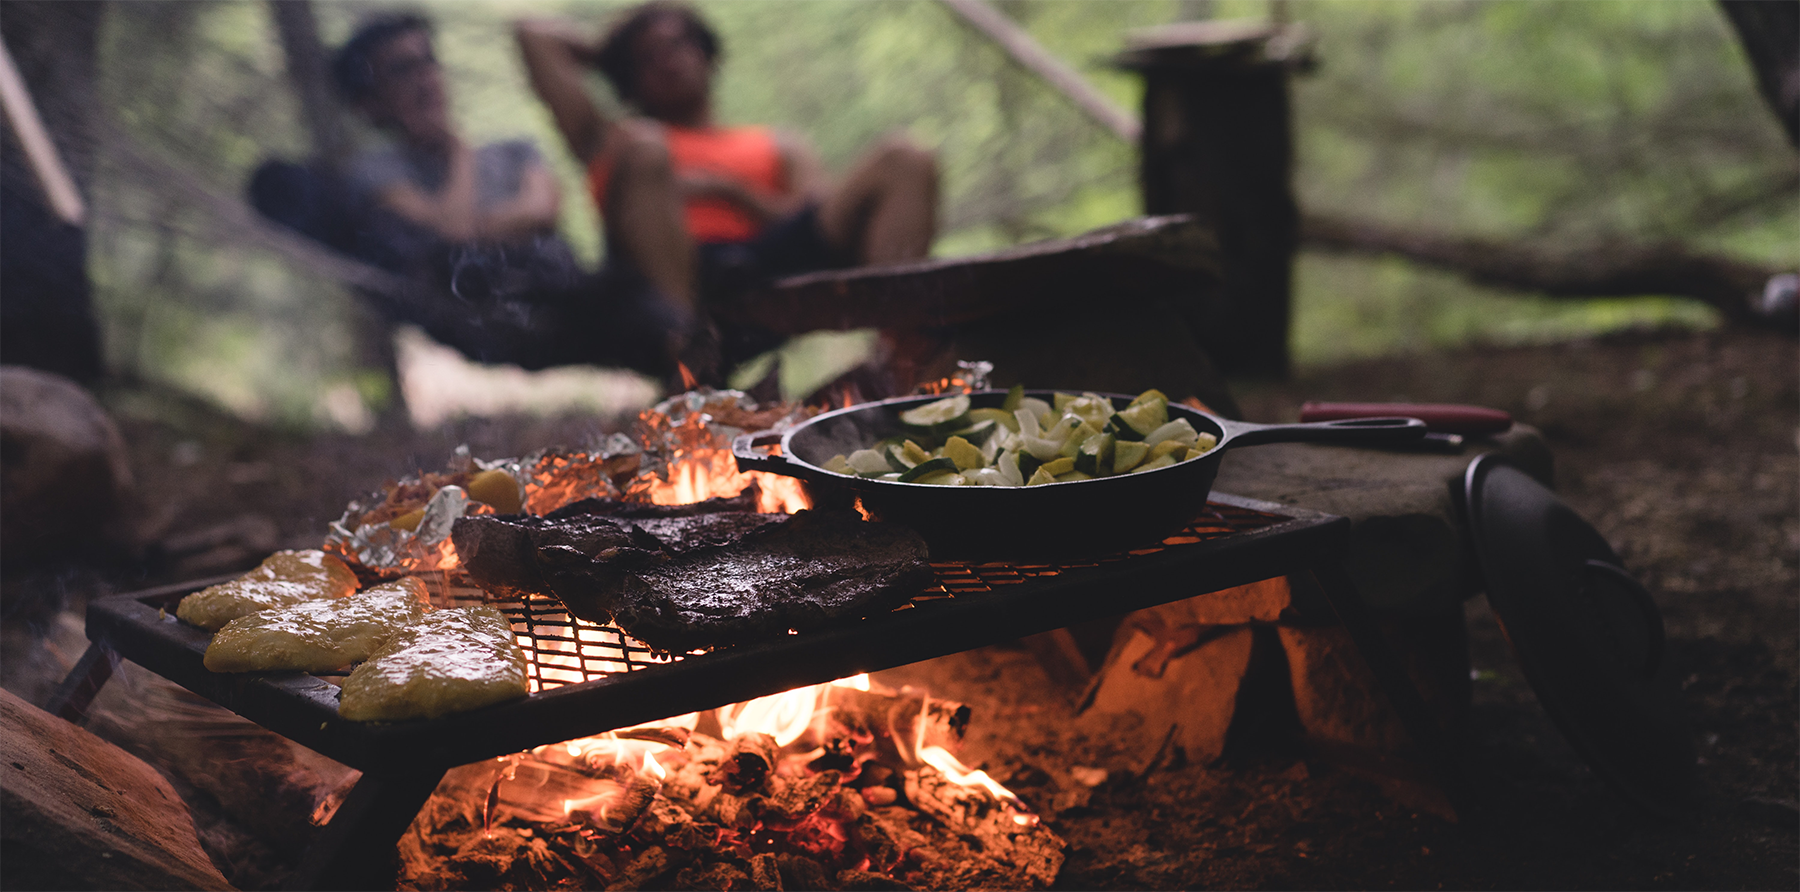 How To Cook While Camping